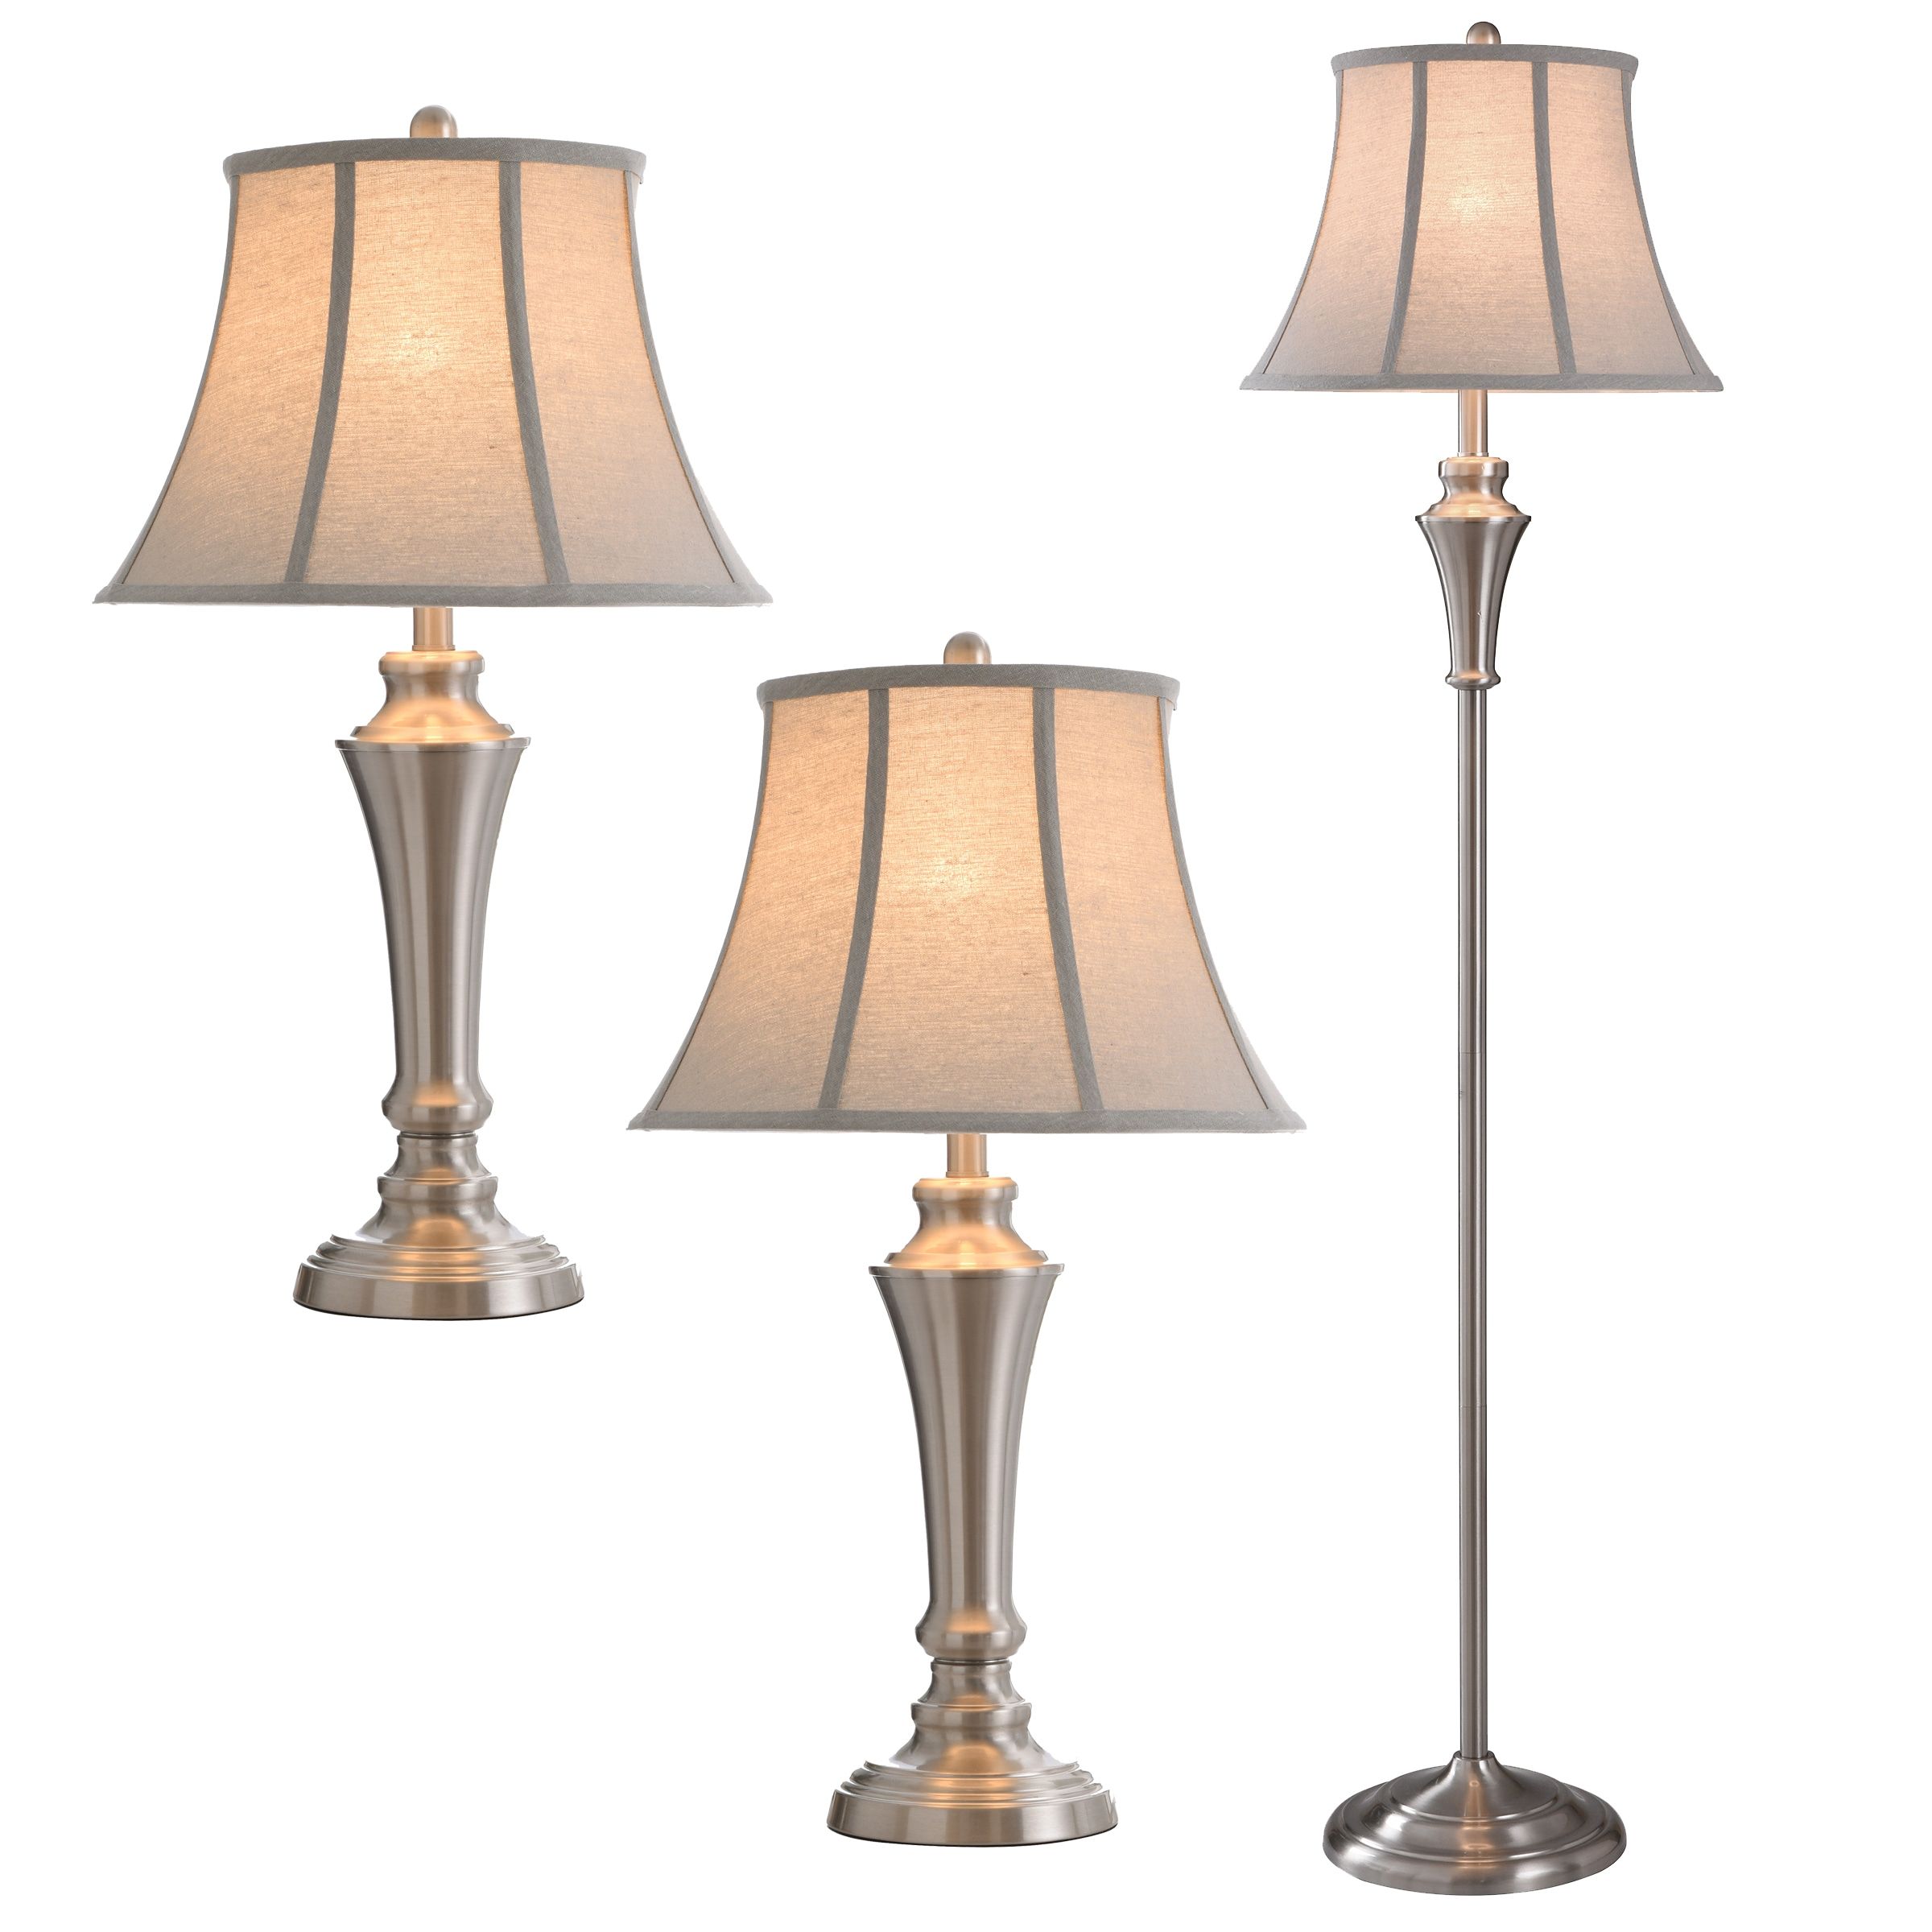 Stylecraft Home Collection Stylecraft Home Collection  Floor Lamp/table Lamp  Set  Brushed Nickel Finish  Geneva Taupe Fabric Shade  3 Piece Set (2  Table, 1 Floor) In The Lamp Sets Department At Lowes Intended For 3 Piece Set Floor Lamps (View 12 of 15)